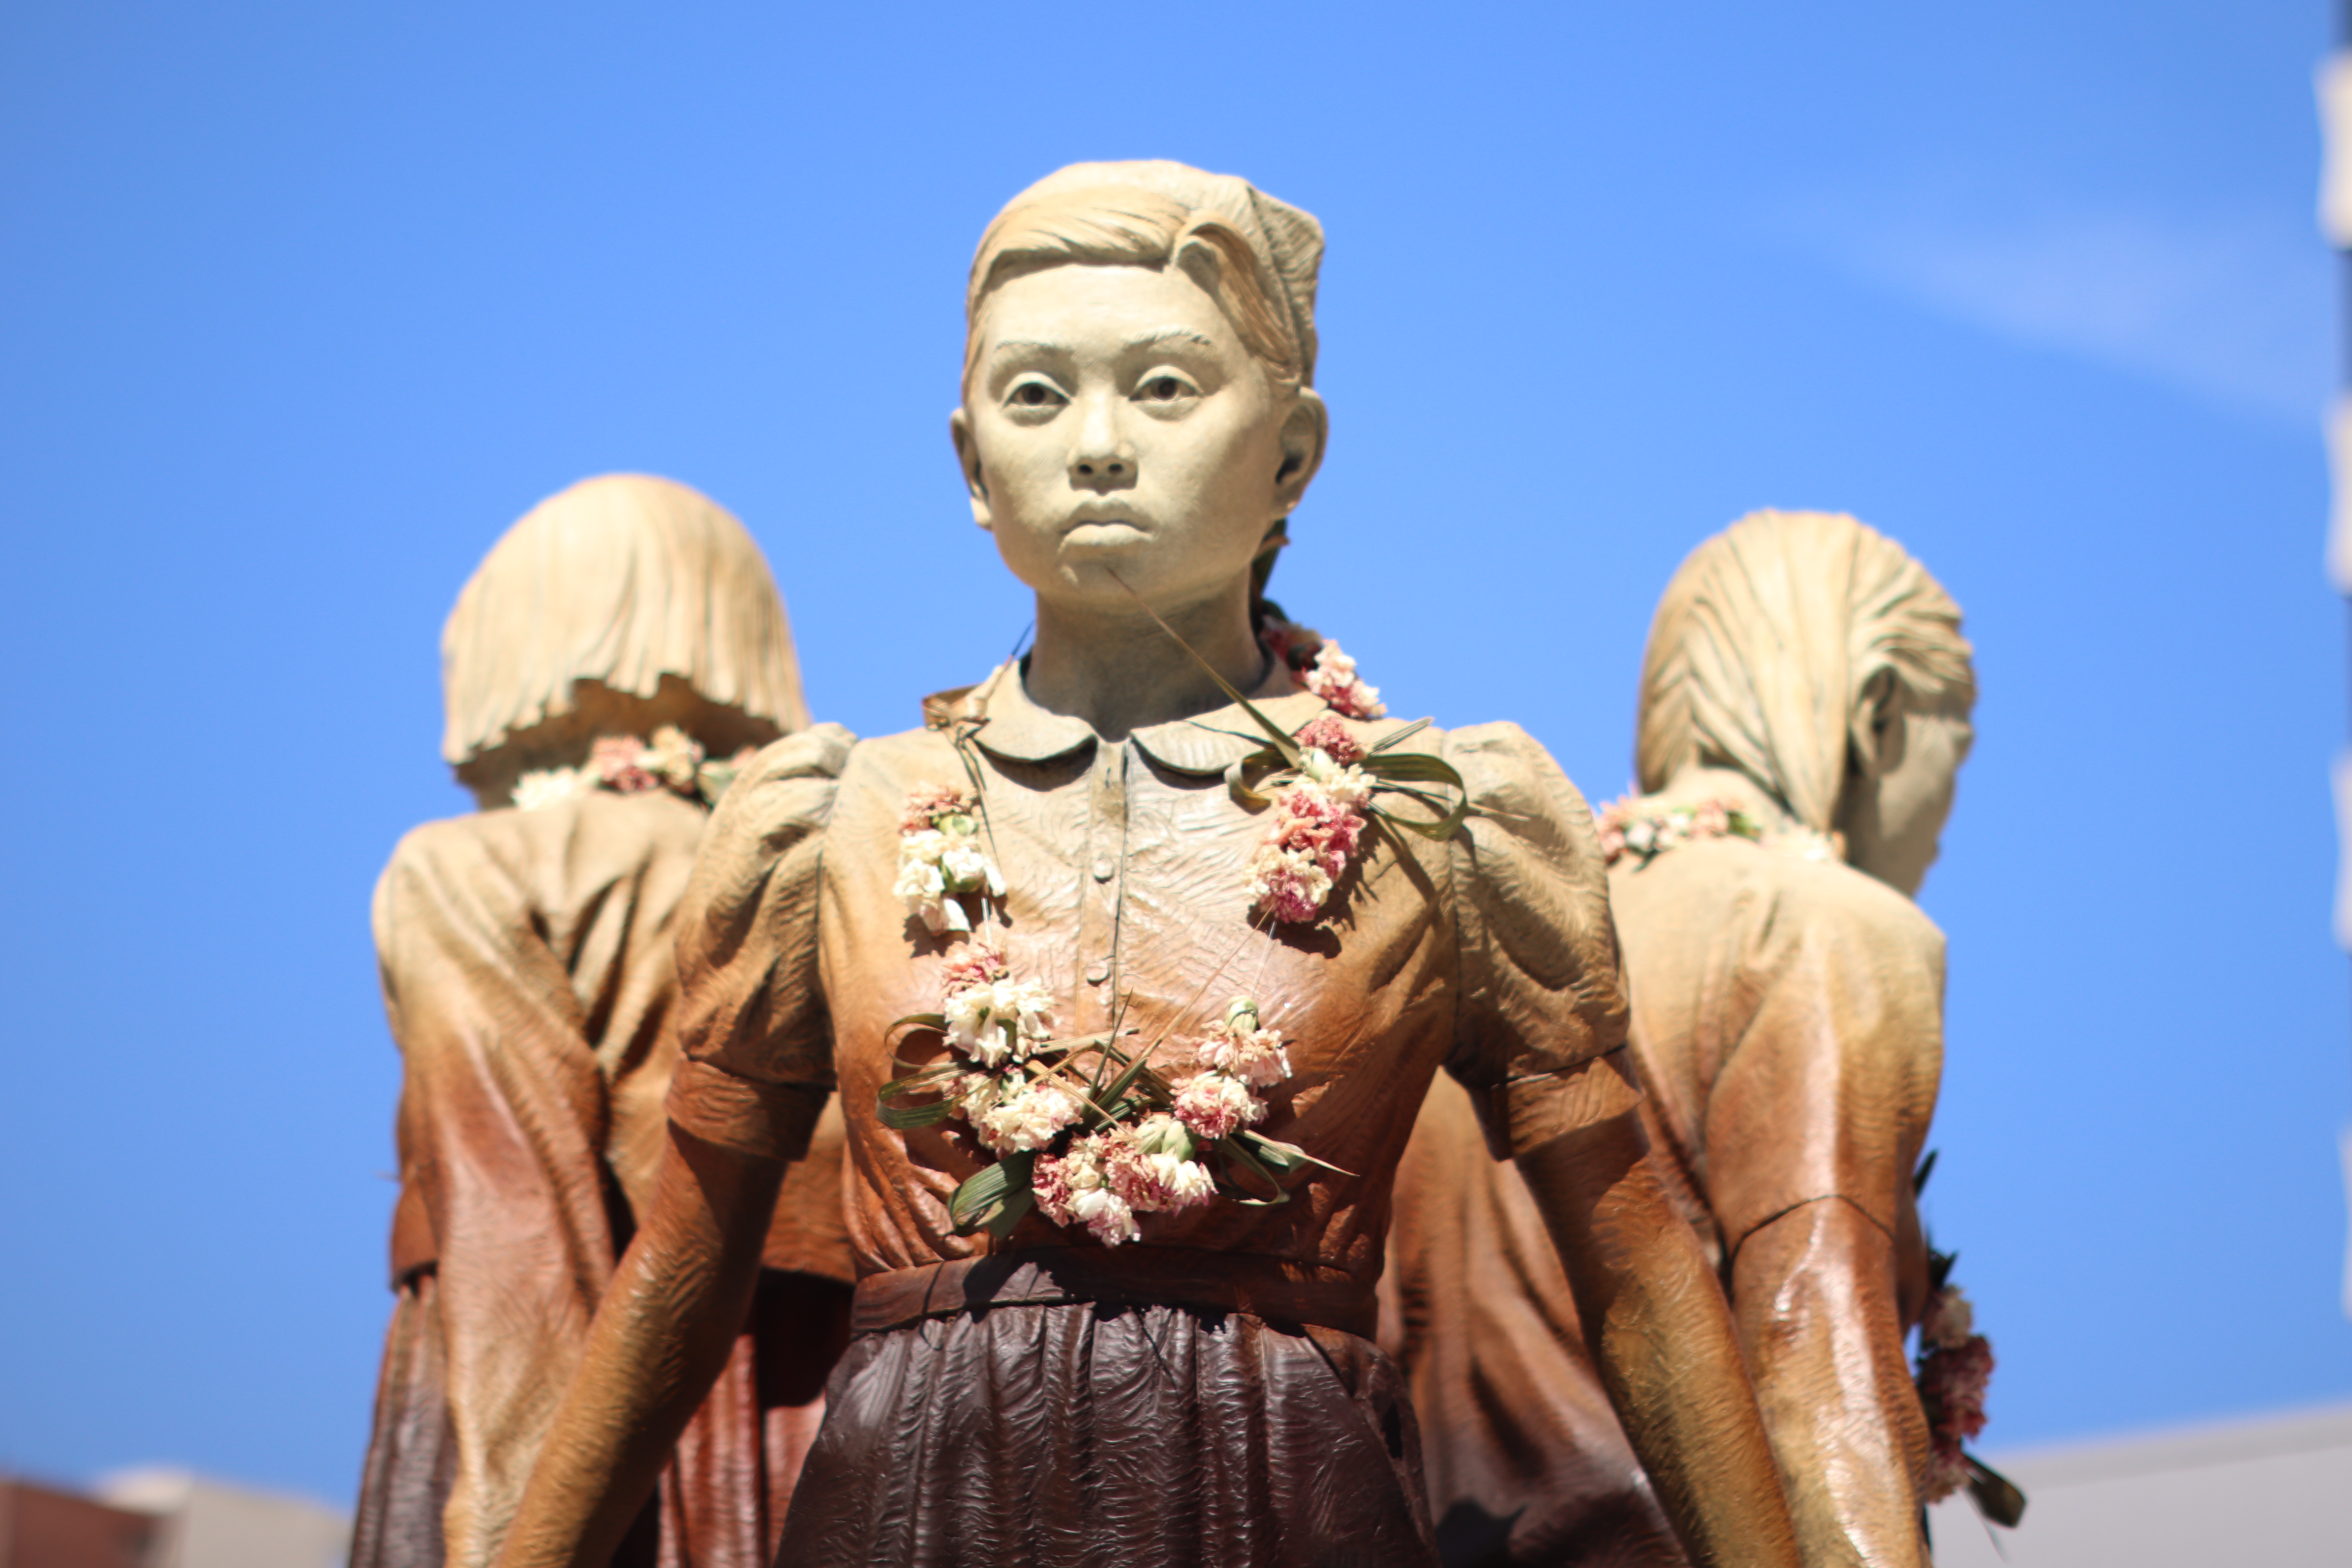 bronze statue of a girl wearing a blouse, holding hands with other two girls, wearing a flower lei necklace